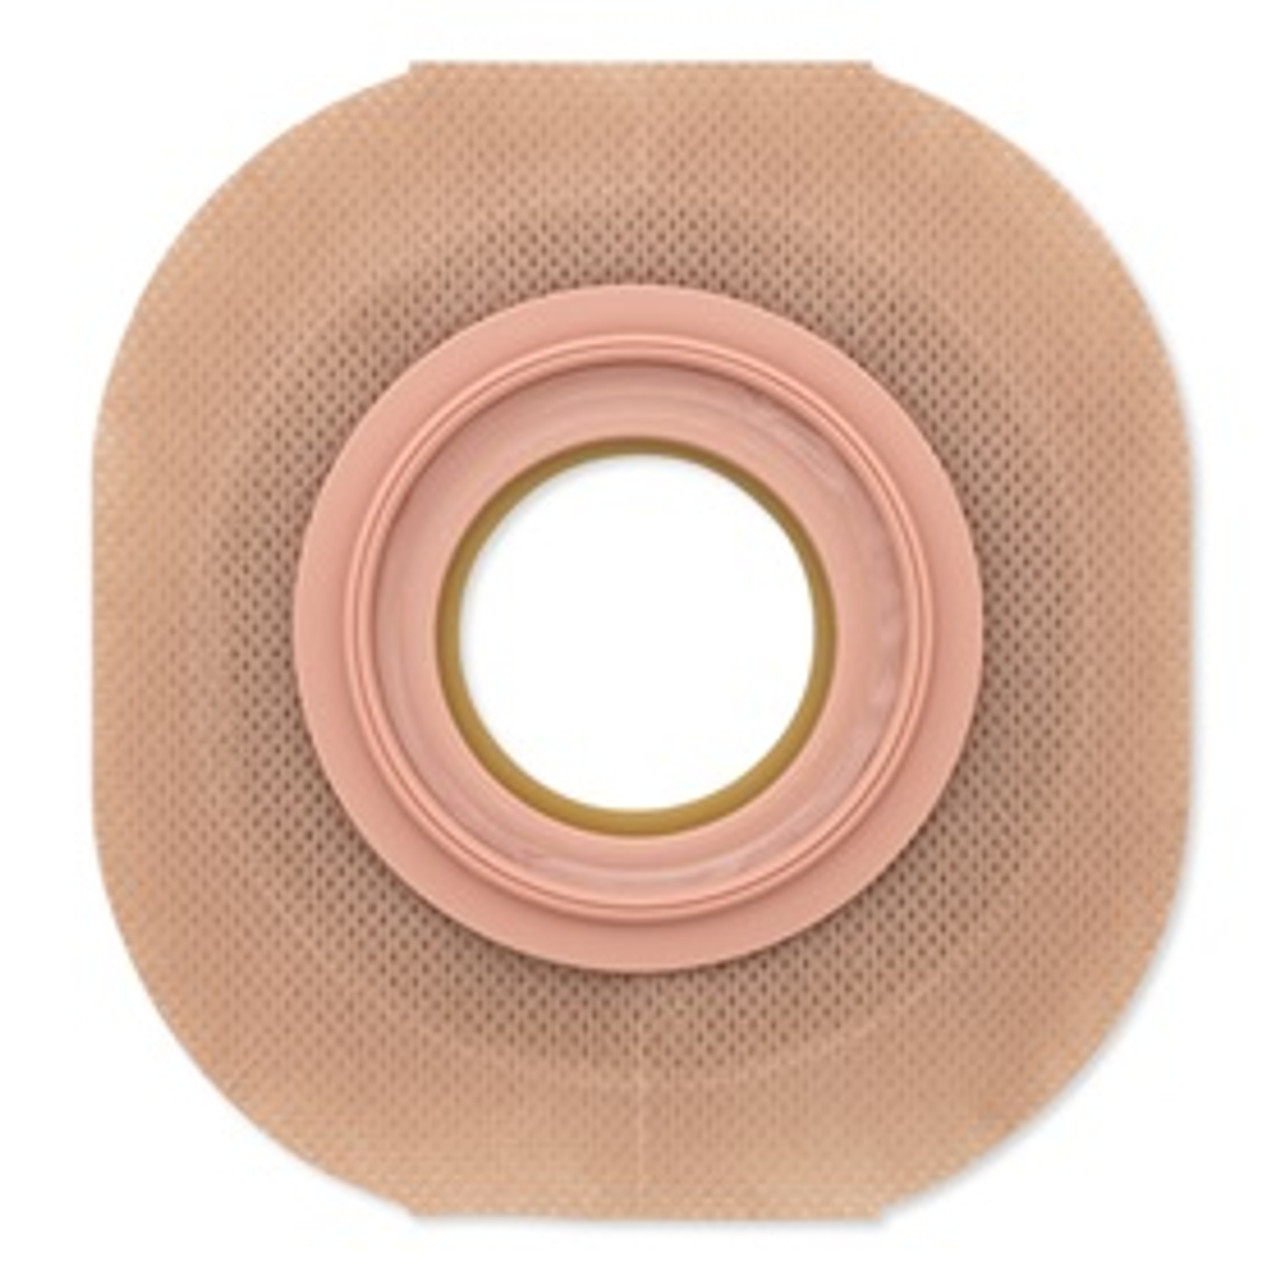 Hollister 13902 BX/5 NEW IMAGE FLEXTEND CONVEX SKIN Barrier WITH TAPERED BORDER, 1 3/4" (44MM) FLANGE, PRE-CUT 3/4" (19MM)